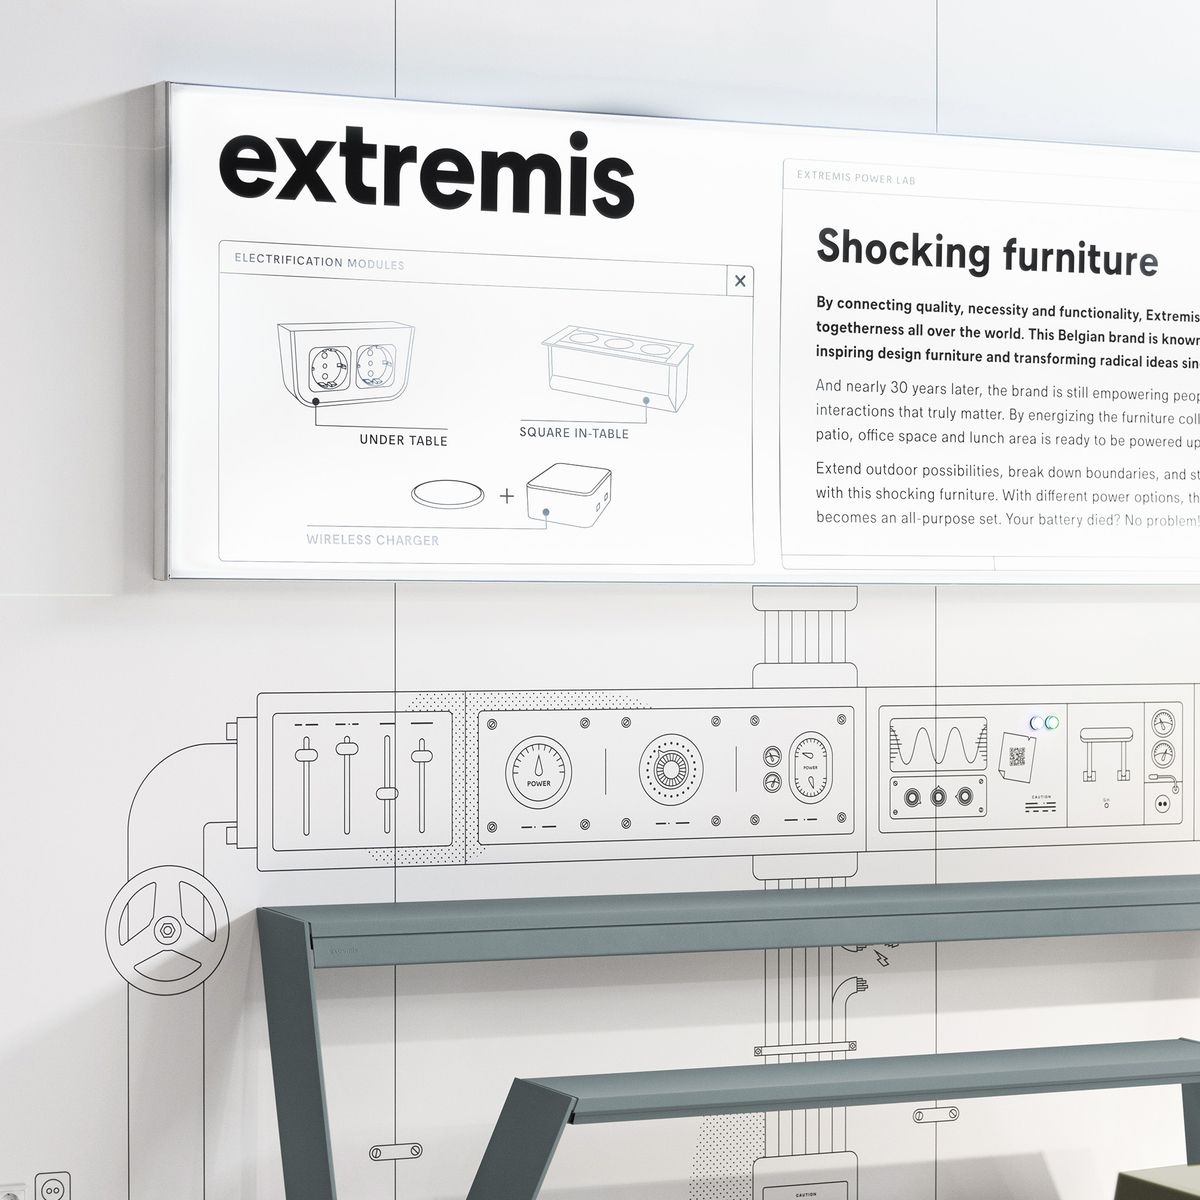 The Extremis Power Lab in Rotterdam